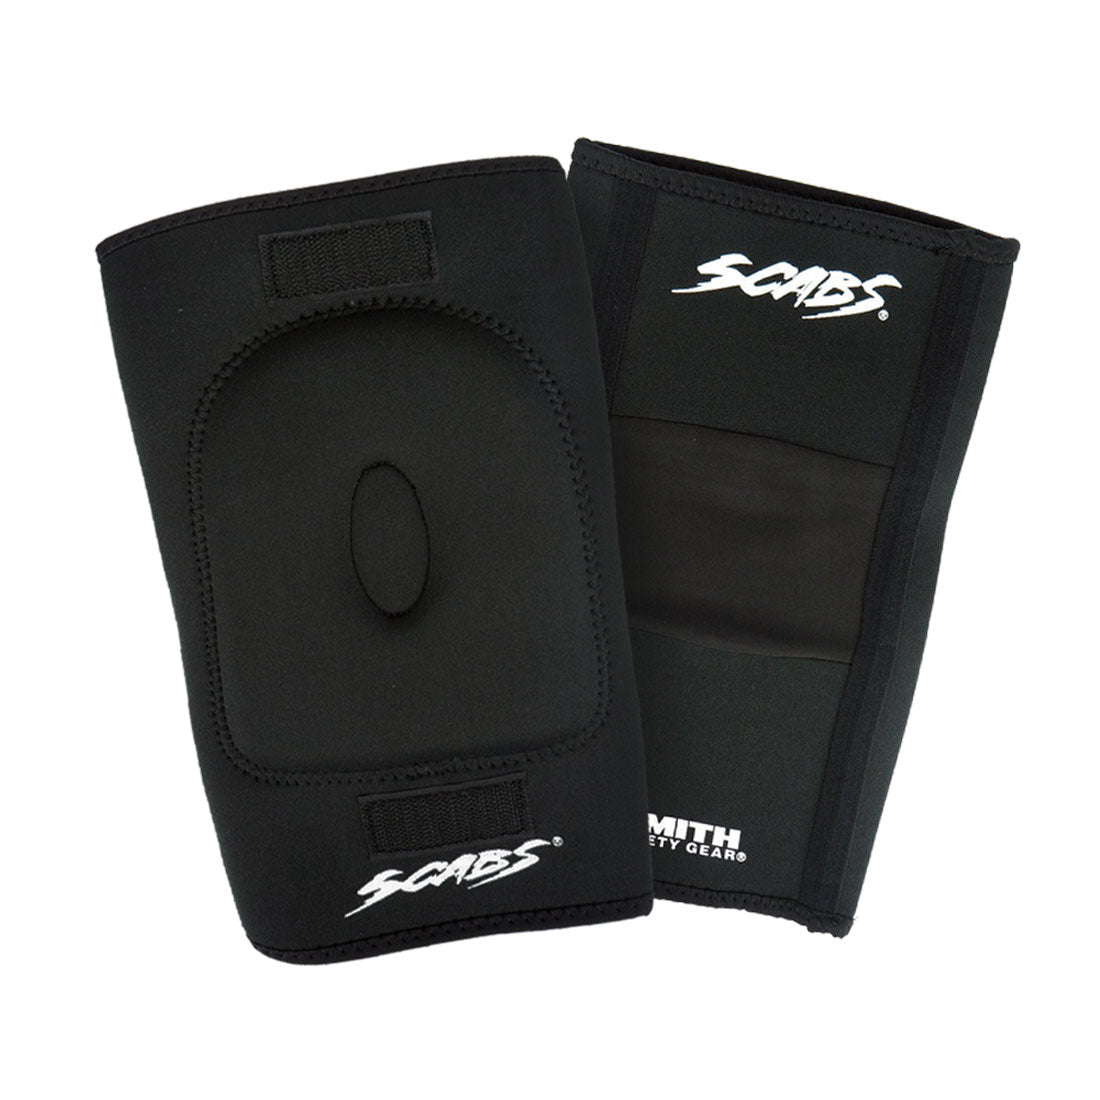 Smith Scabs Knee Gasket - Black Protective Gear